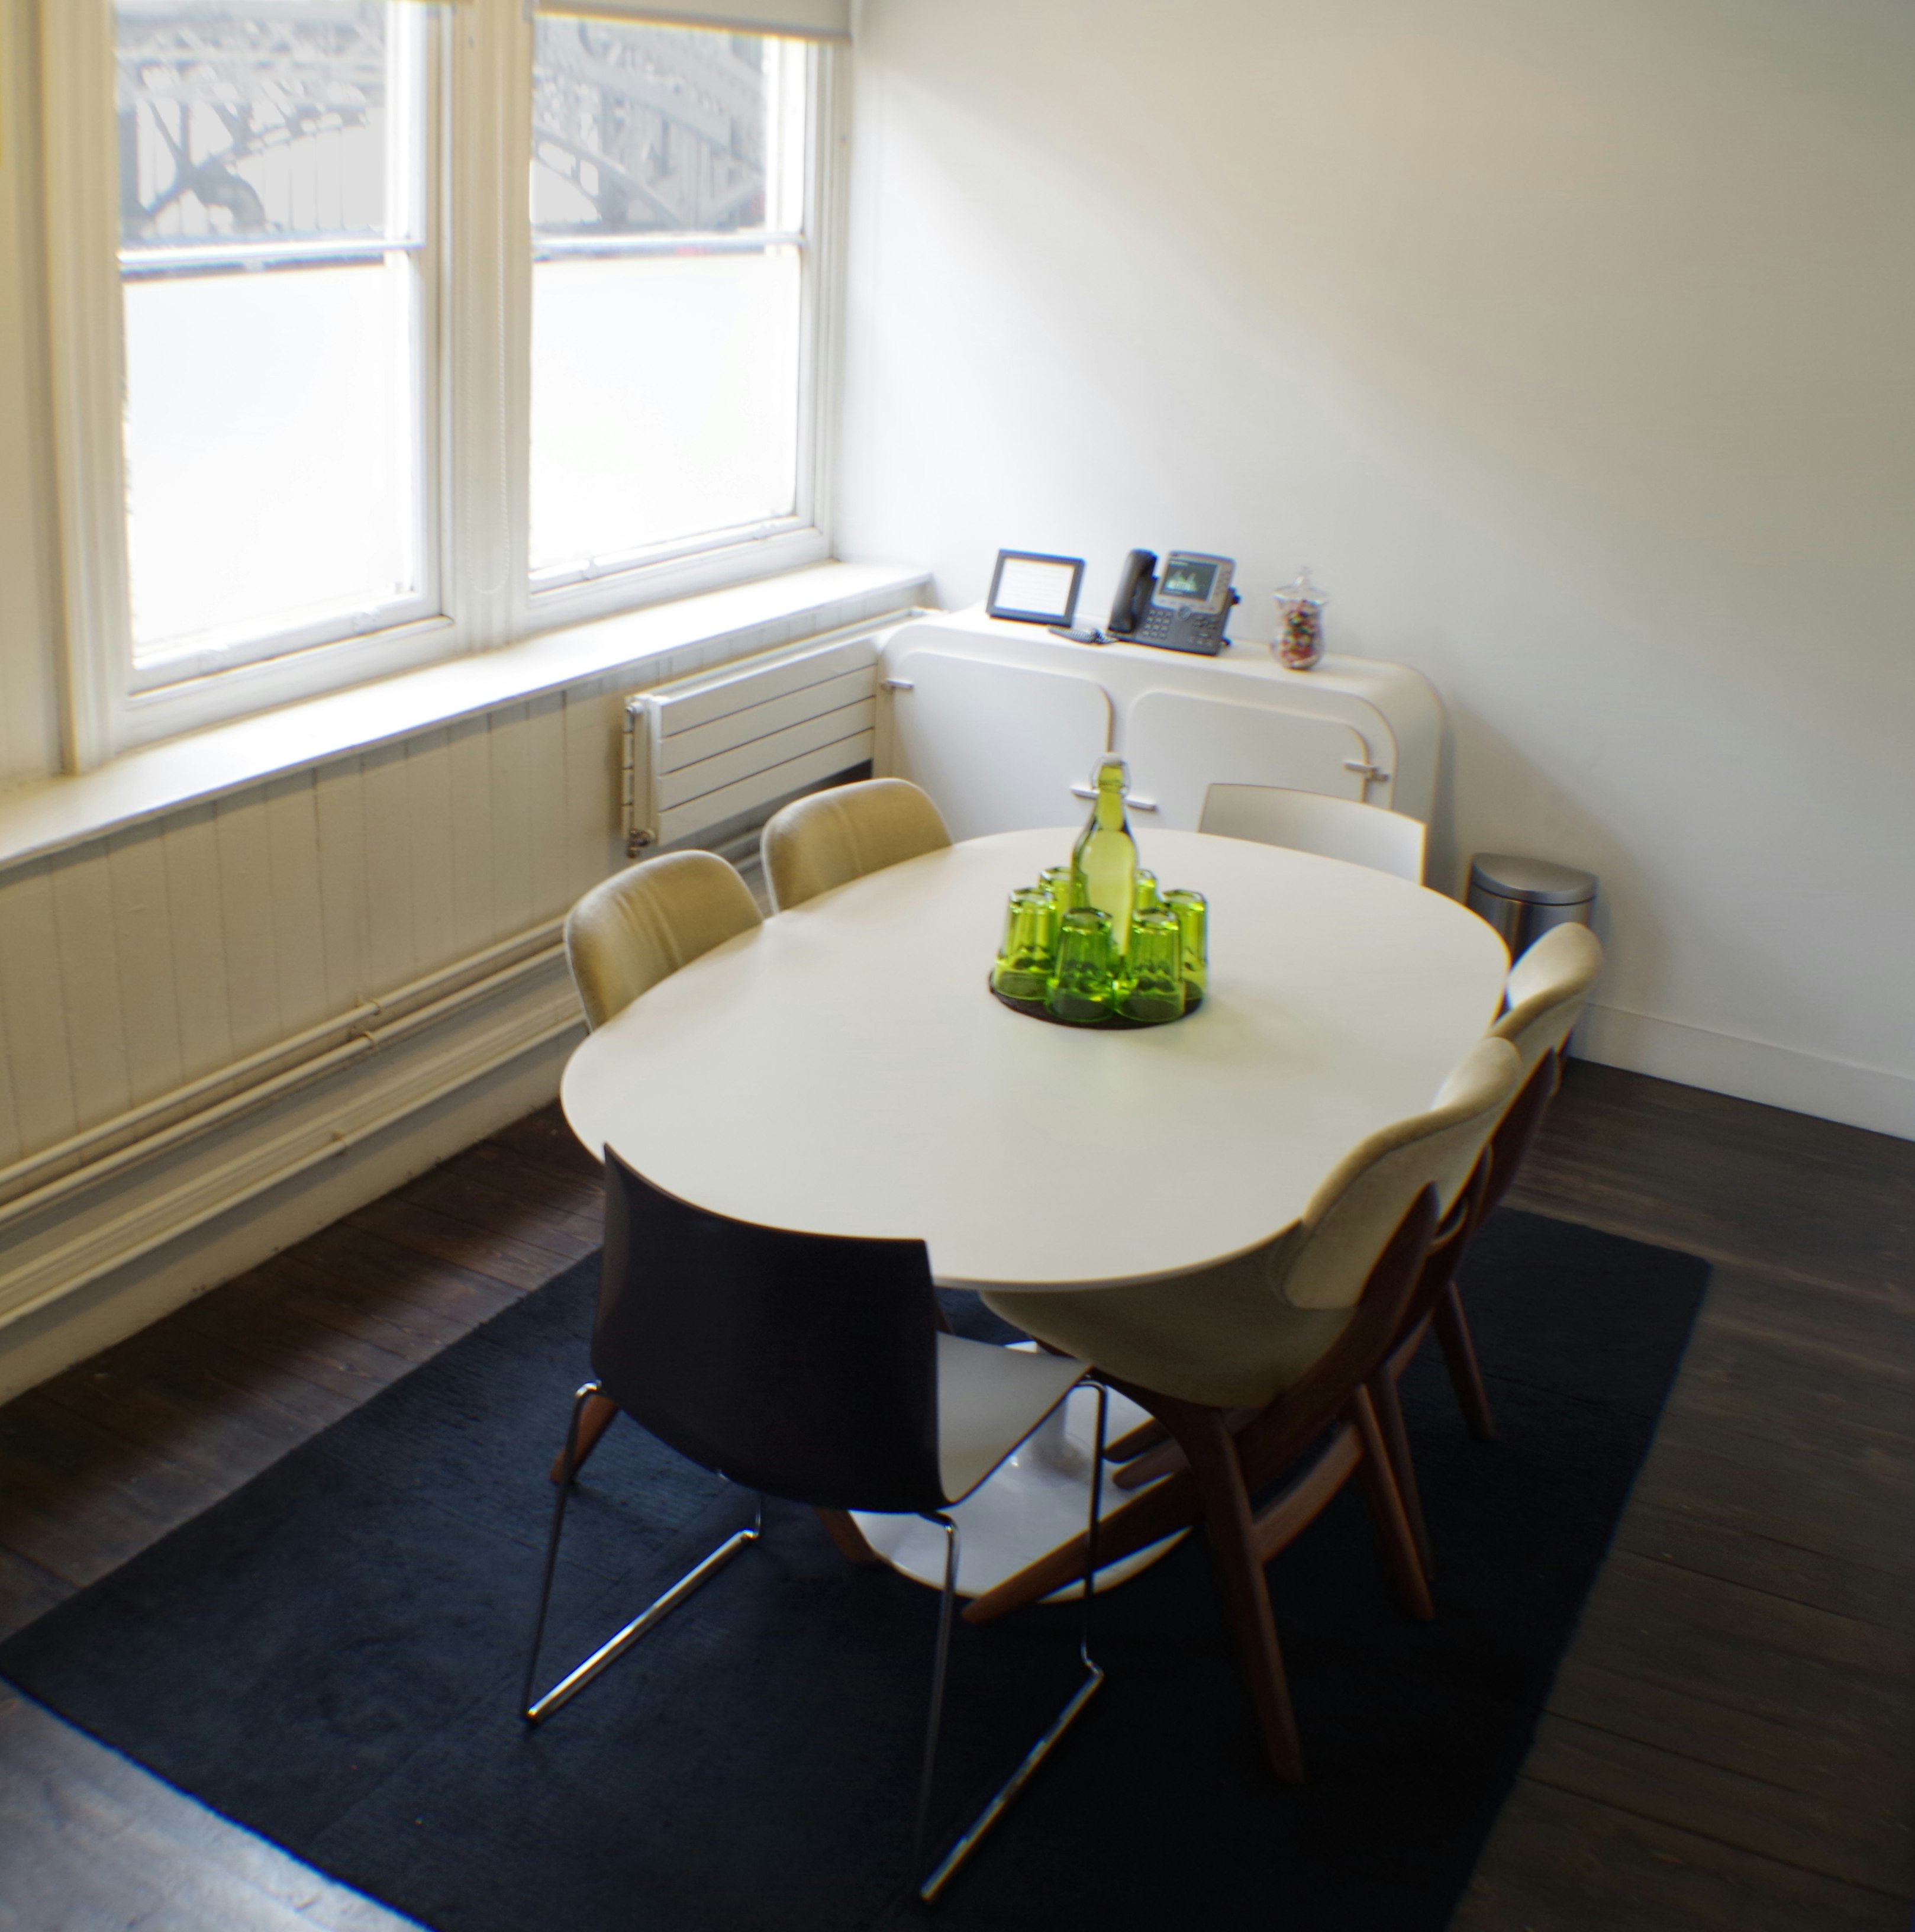 Meeting Rooms Venues in North London - The Office Group Marylebone Station